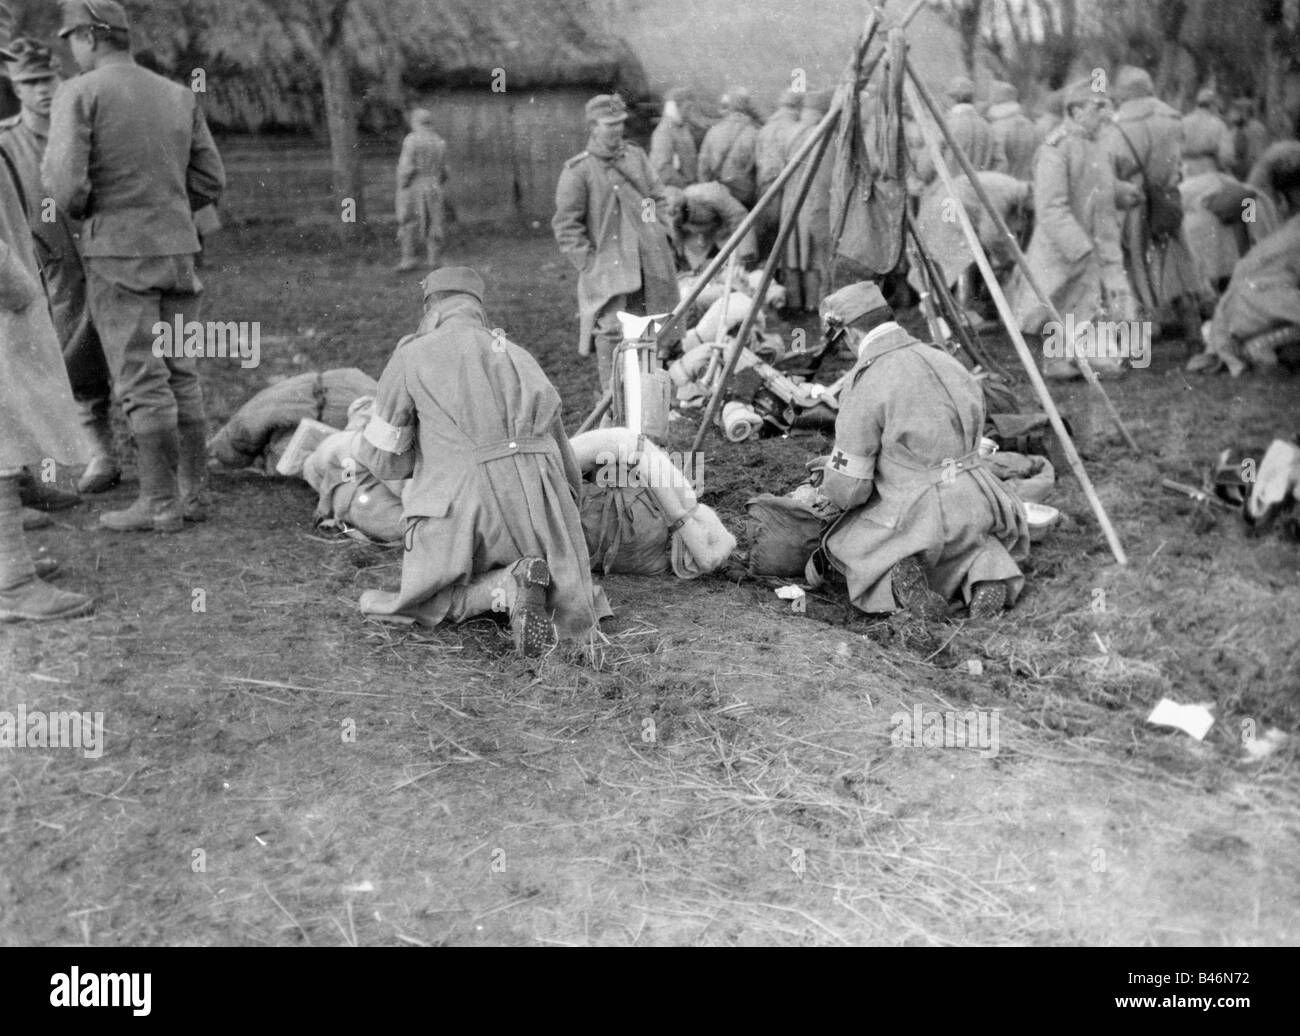 events, First World War / WWI, military, soldiers, Austrian corpsmen, 20th century, uniform, uniforms, Austria-Hungary, Austria, Hungary, historic, historical, bivouac, military camp, people, 1910s, Stock Photo